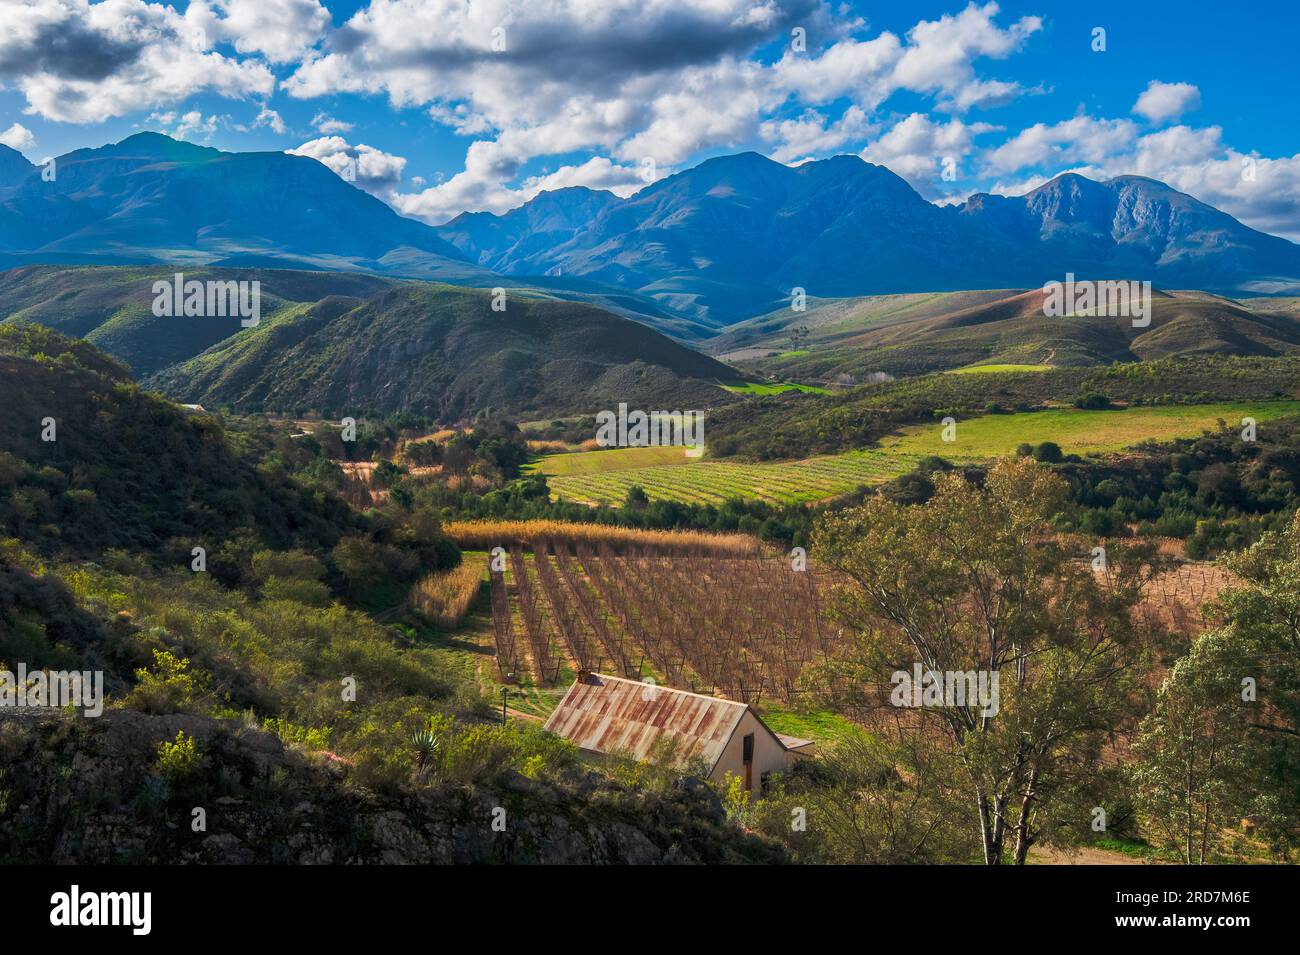 Orchard in a Kammanassie mountian valley Stock Photo